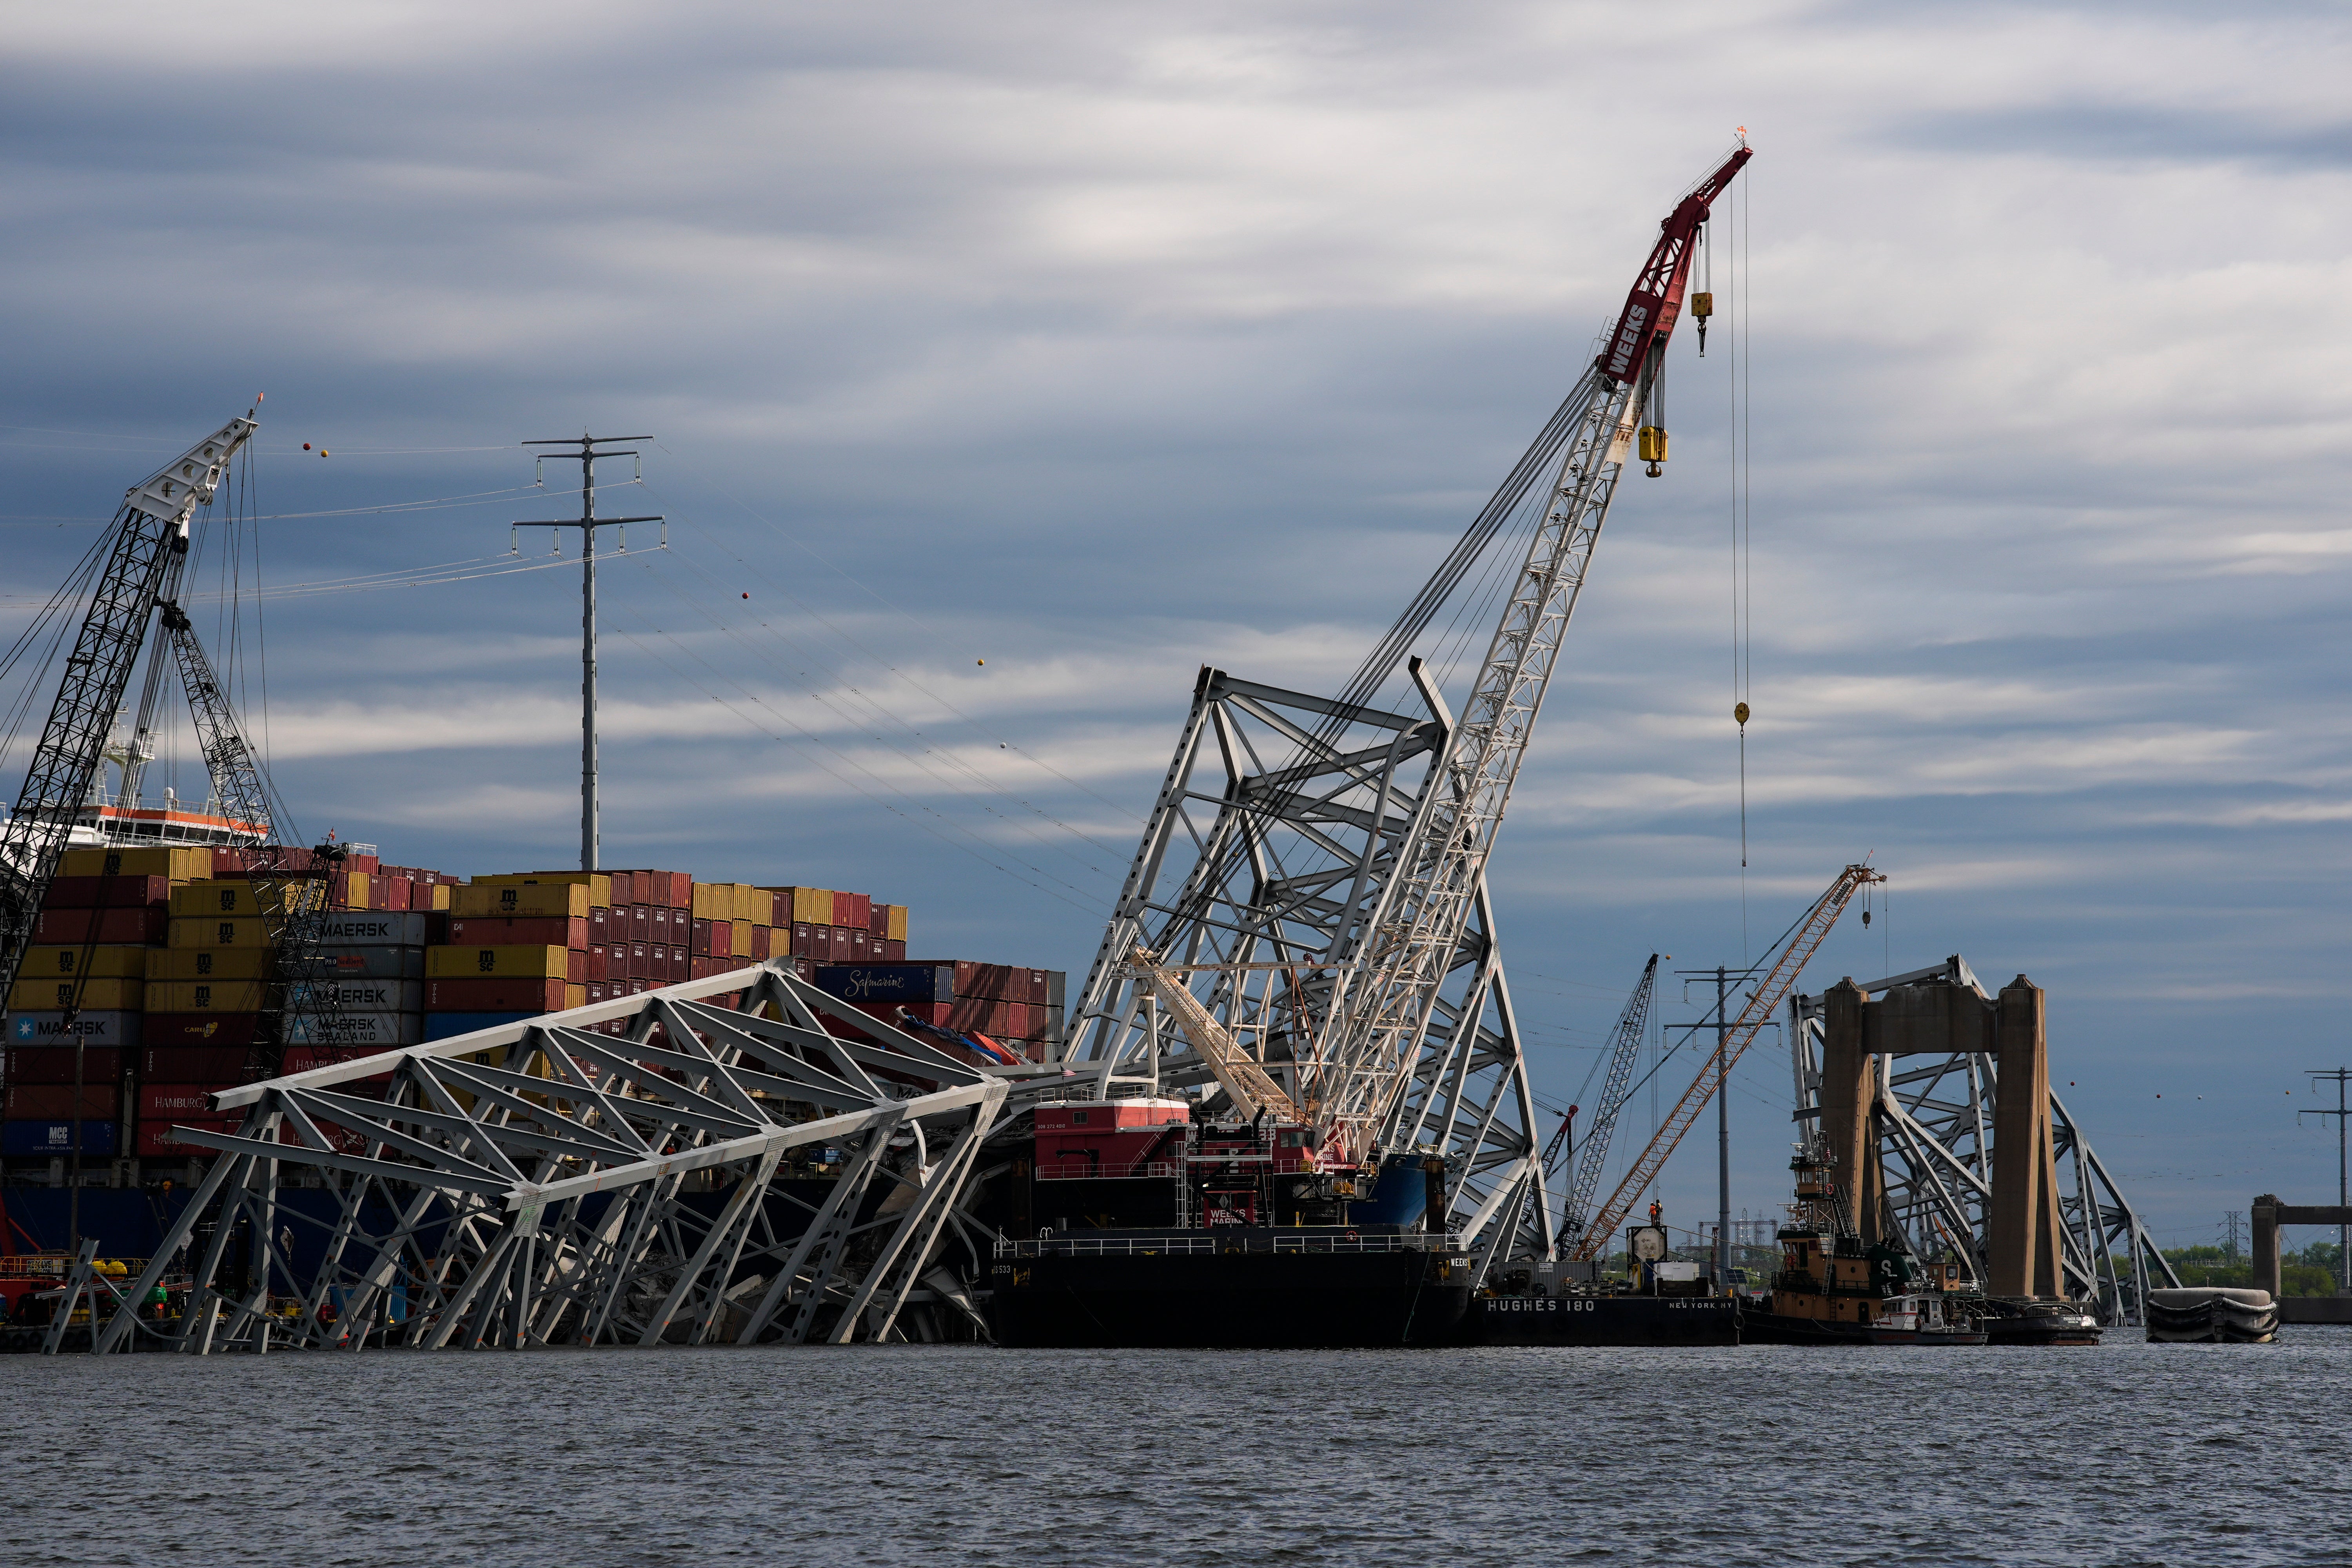 Work continues at the site of the collapsed Francis Scott Key Bridge in Baltimore, Maryland. State officials revealed that the cost to replace the bridge will be between $1.7bn and $1.9bn